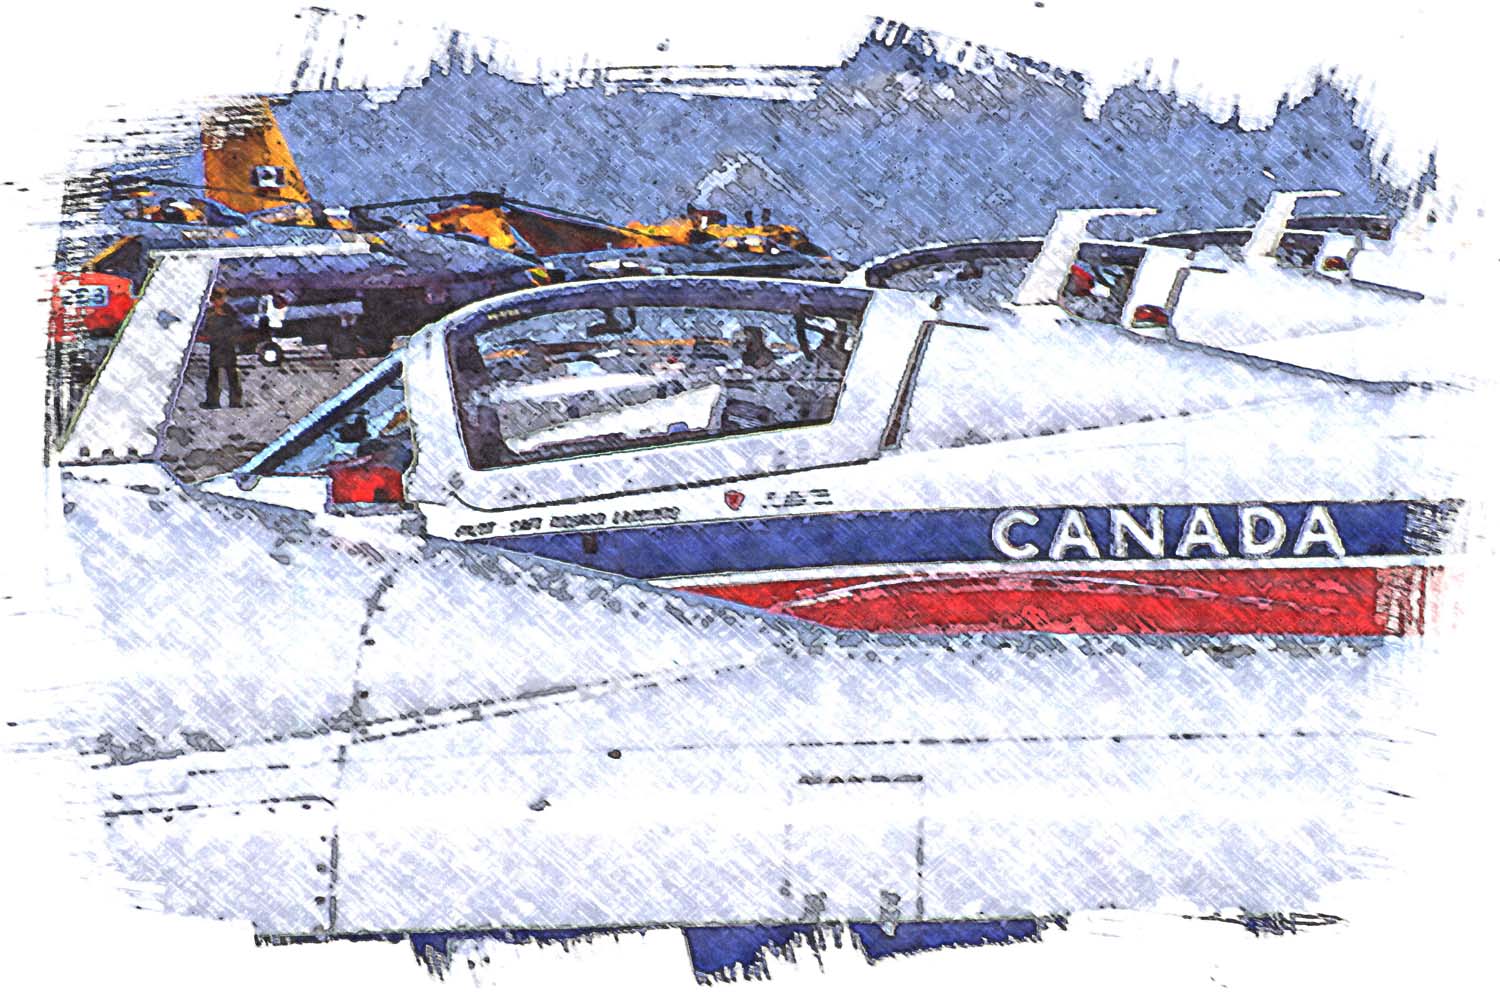 static shot of Canadian Snowbirds airplanes